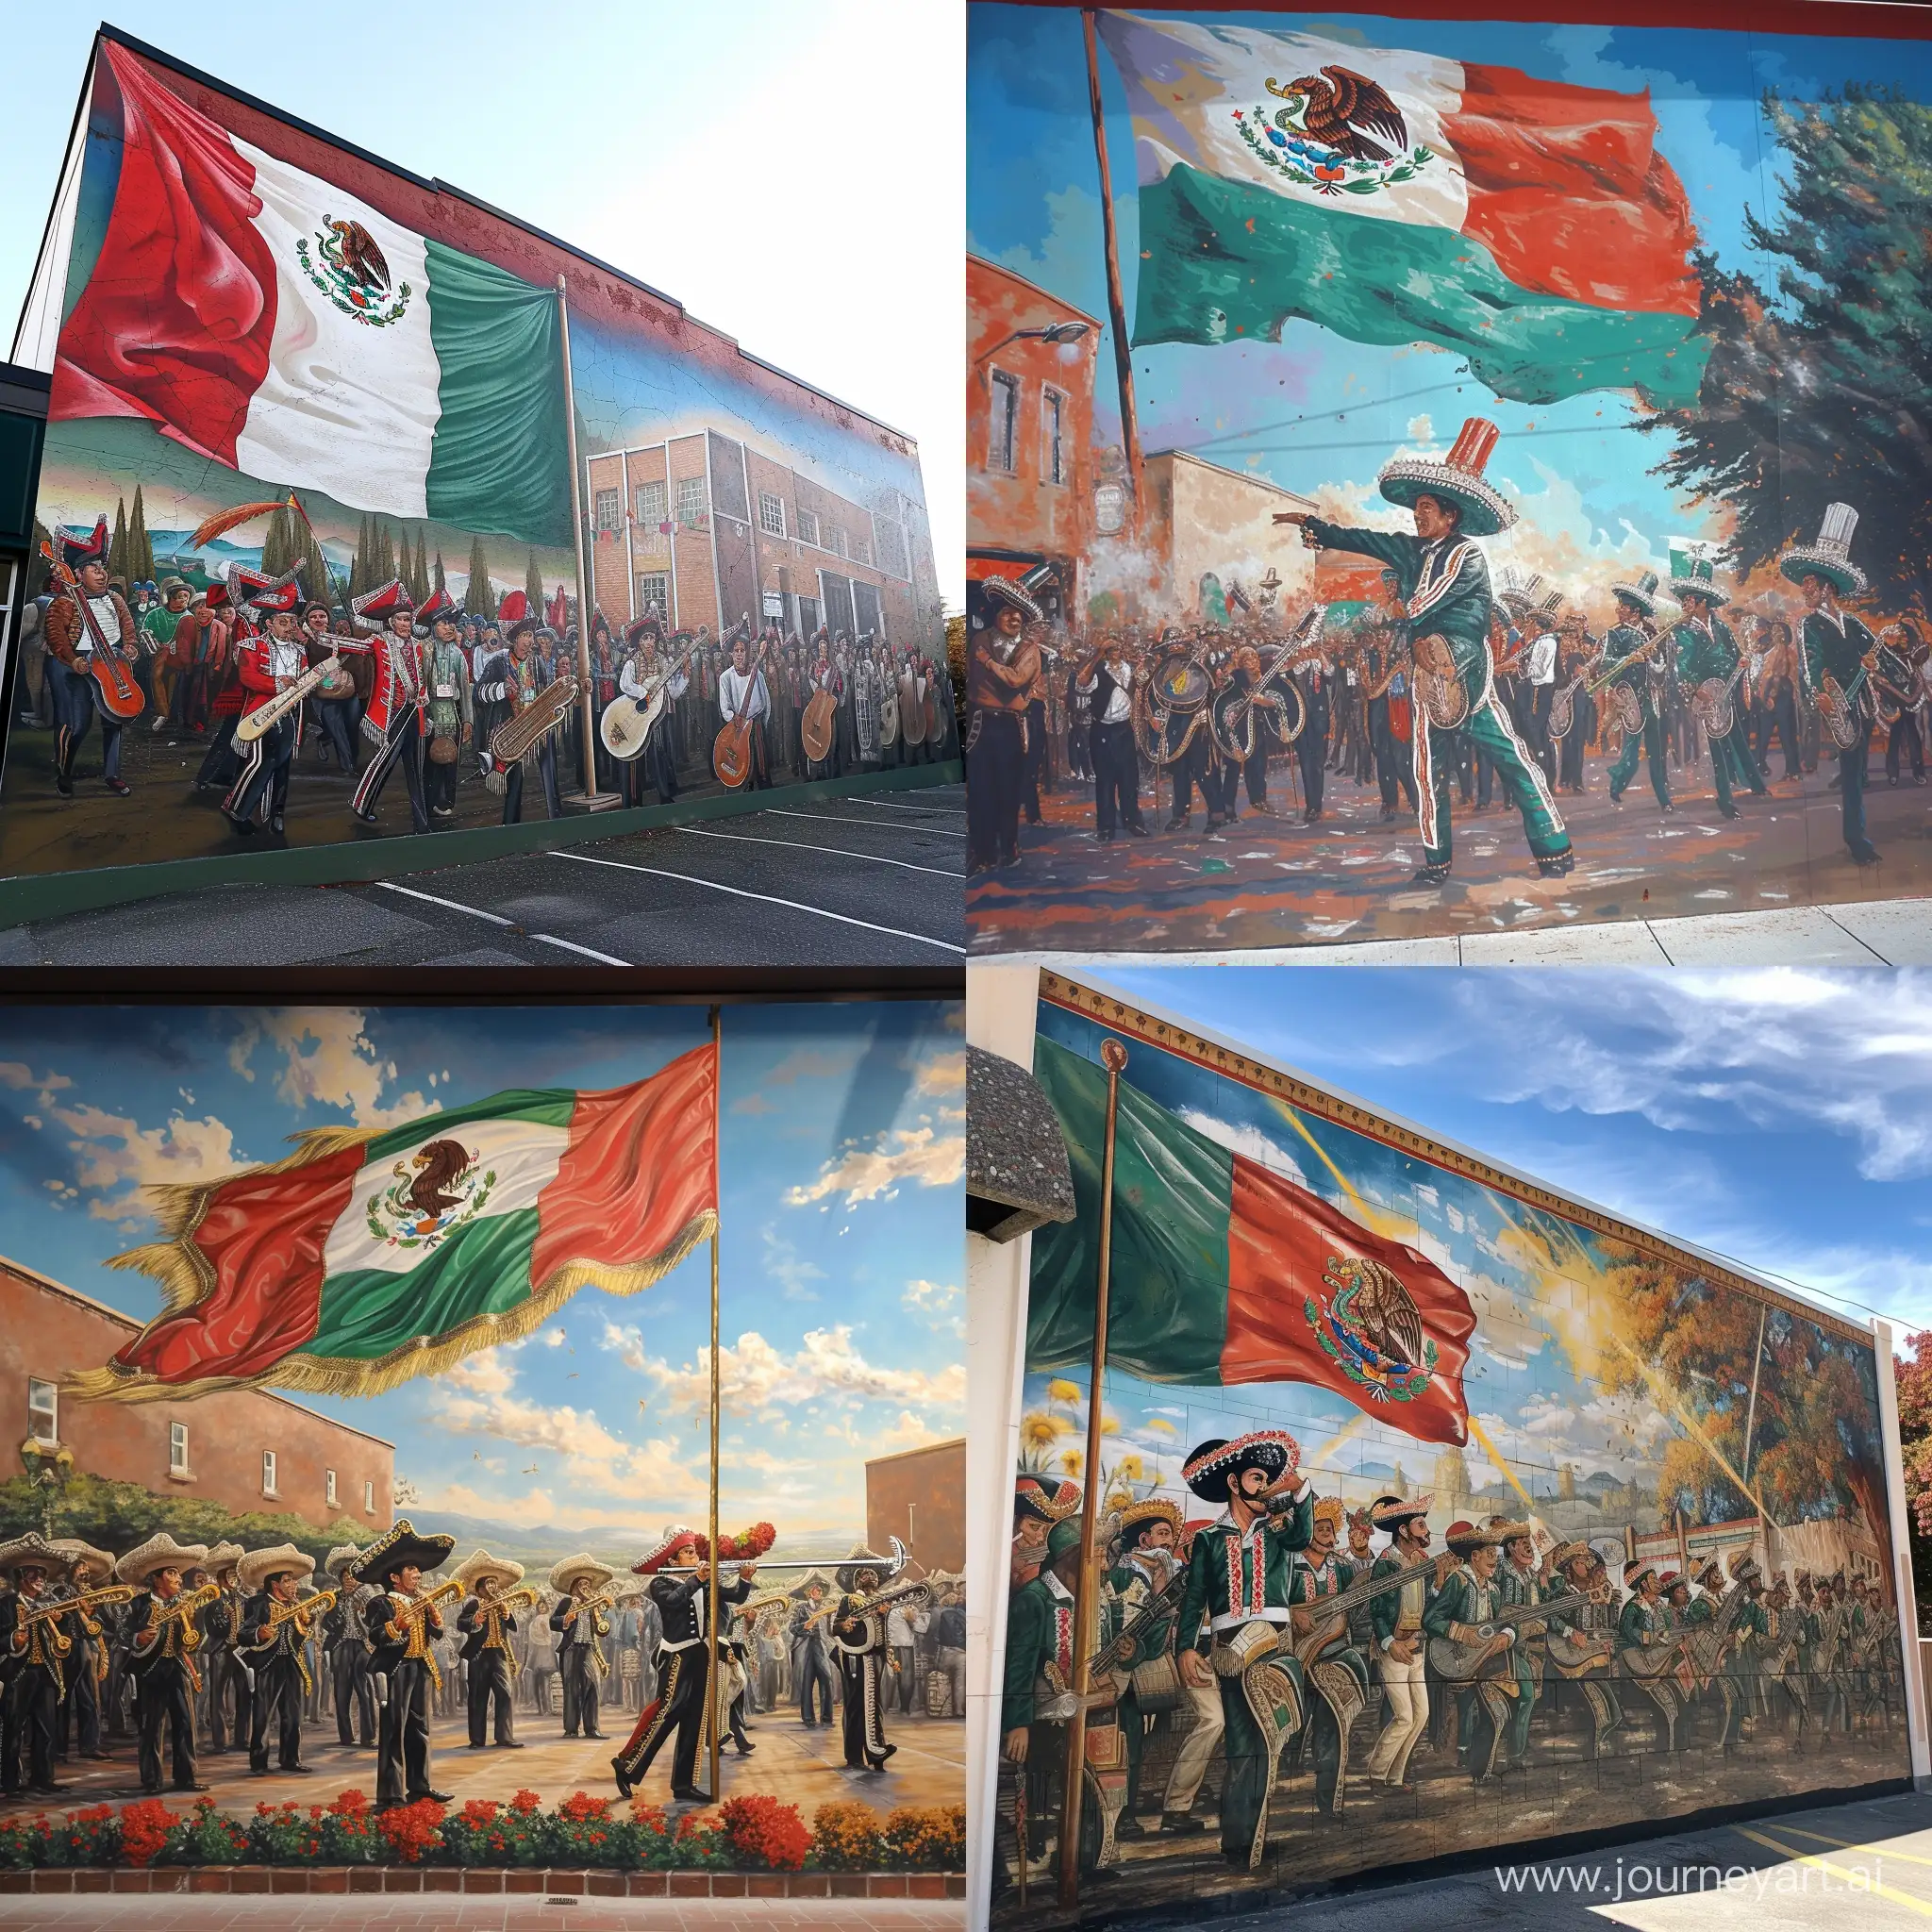 Vibrant-Mexican-Immigrant-Mural-in-Washington-State-with-Flag-and-Mariachi-Bands